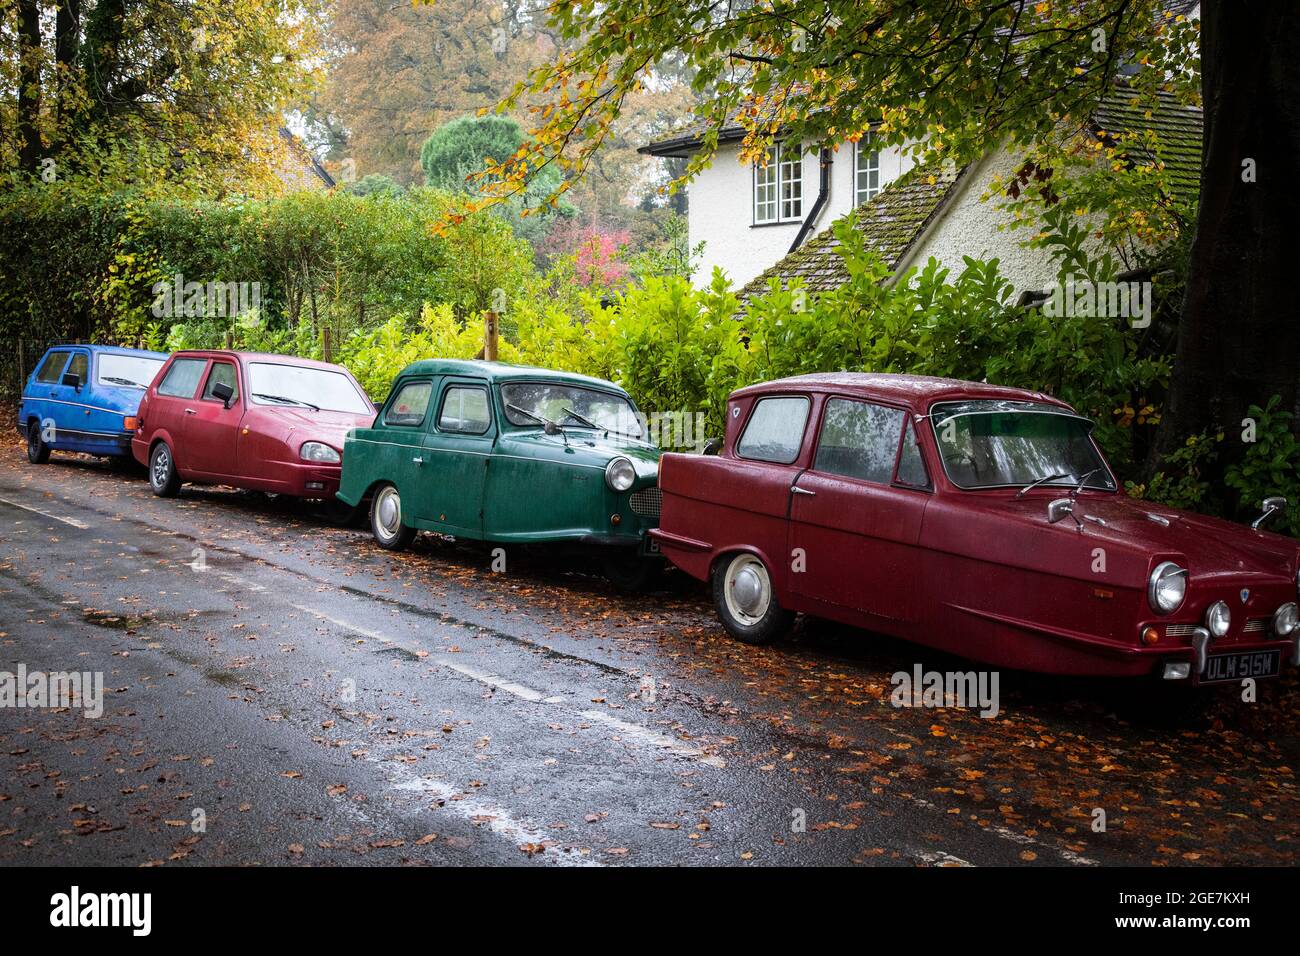 Four Reliant Robins parked in a country road, Surrey, England. Stock Photo